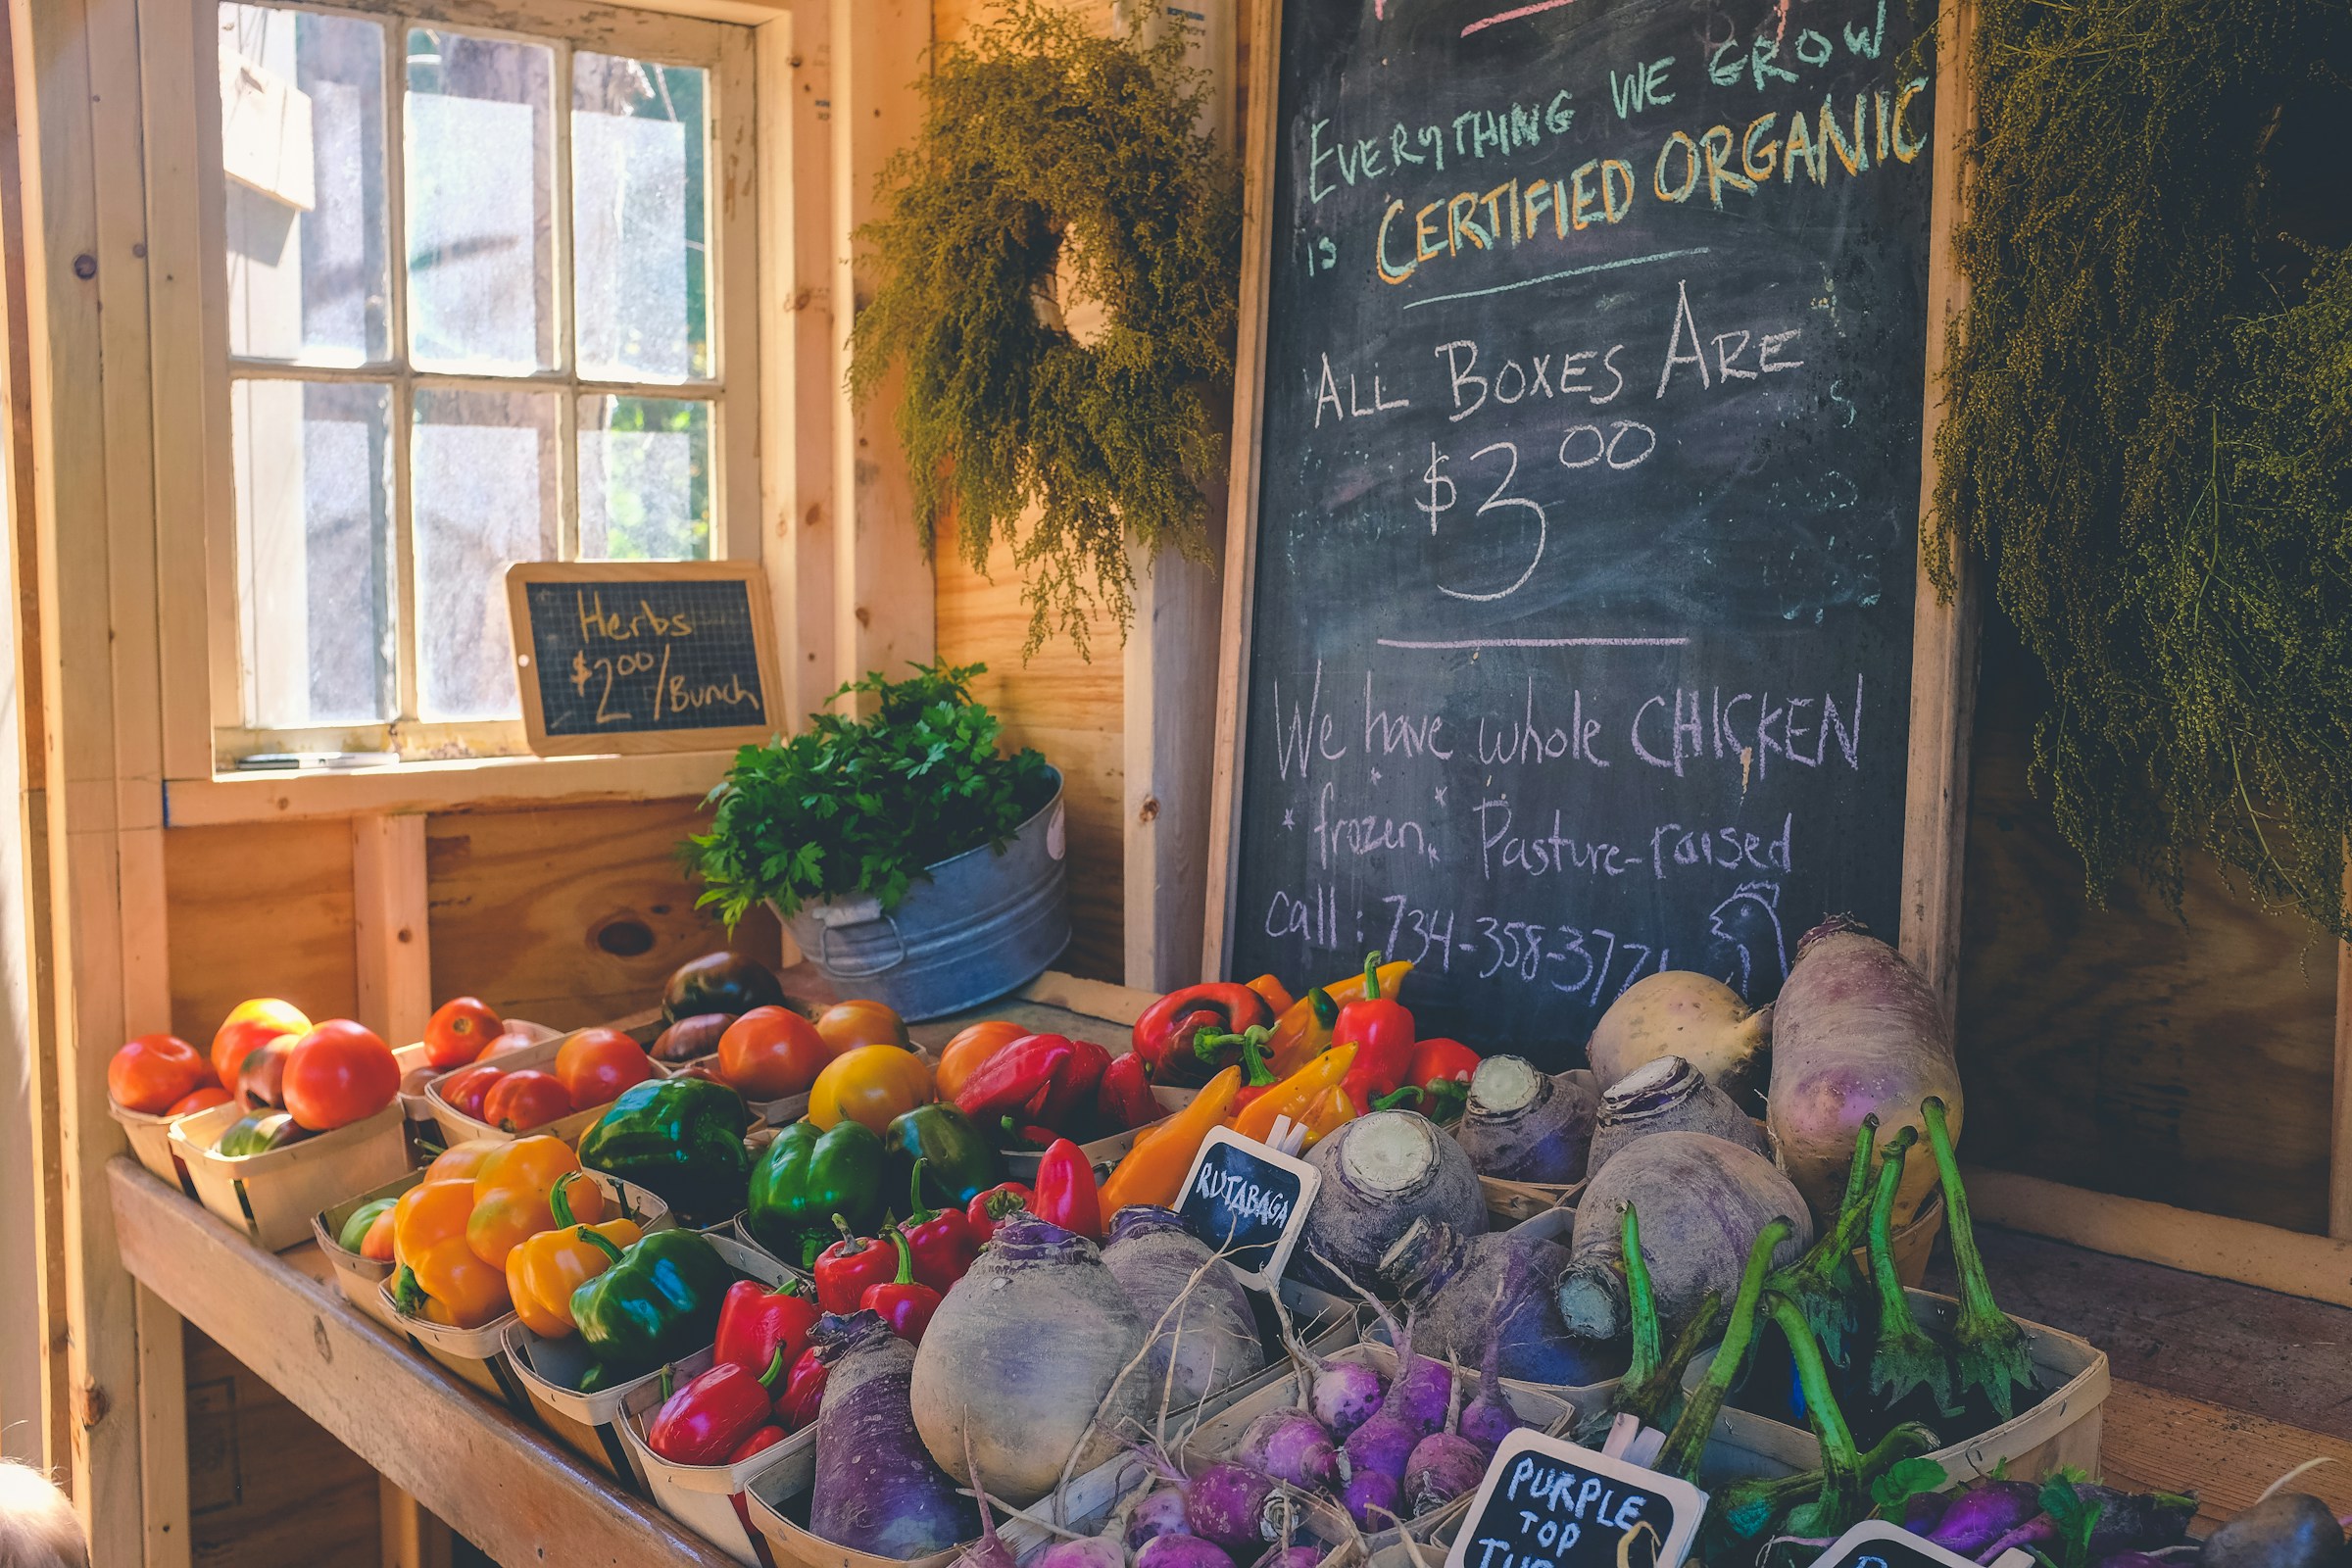 Does Eating Local Produce Benefit the Planet?